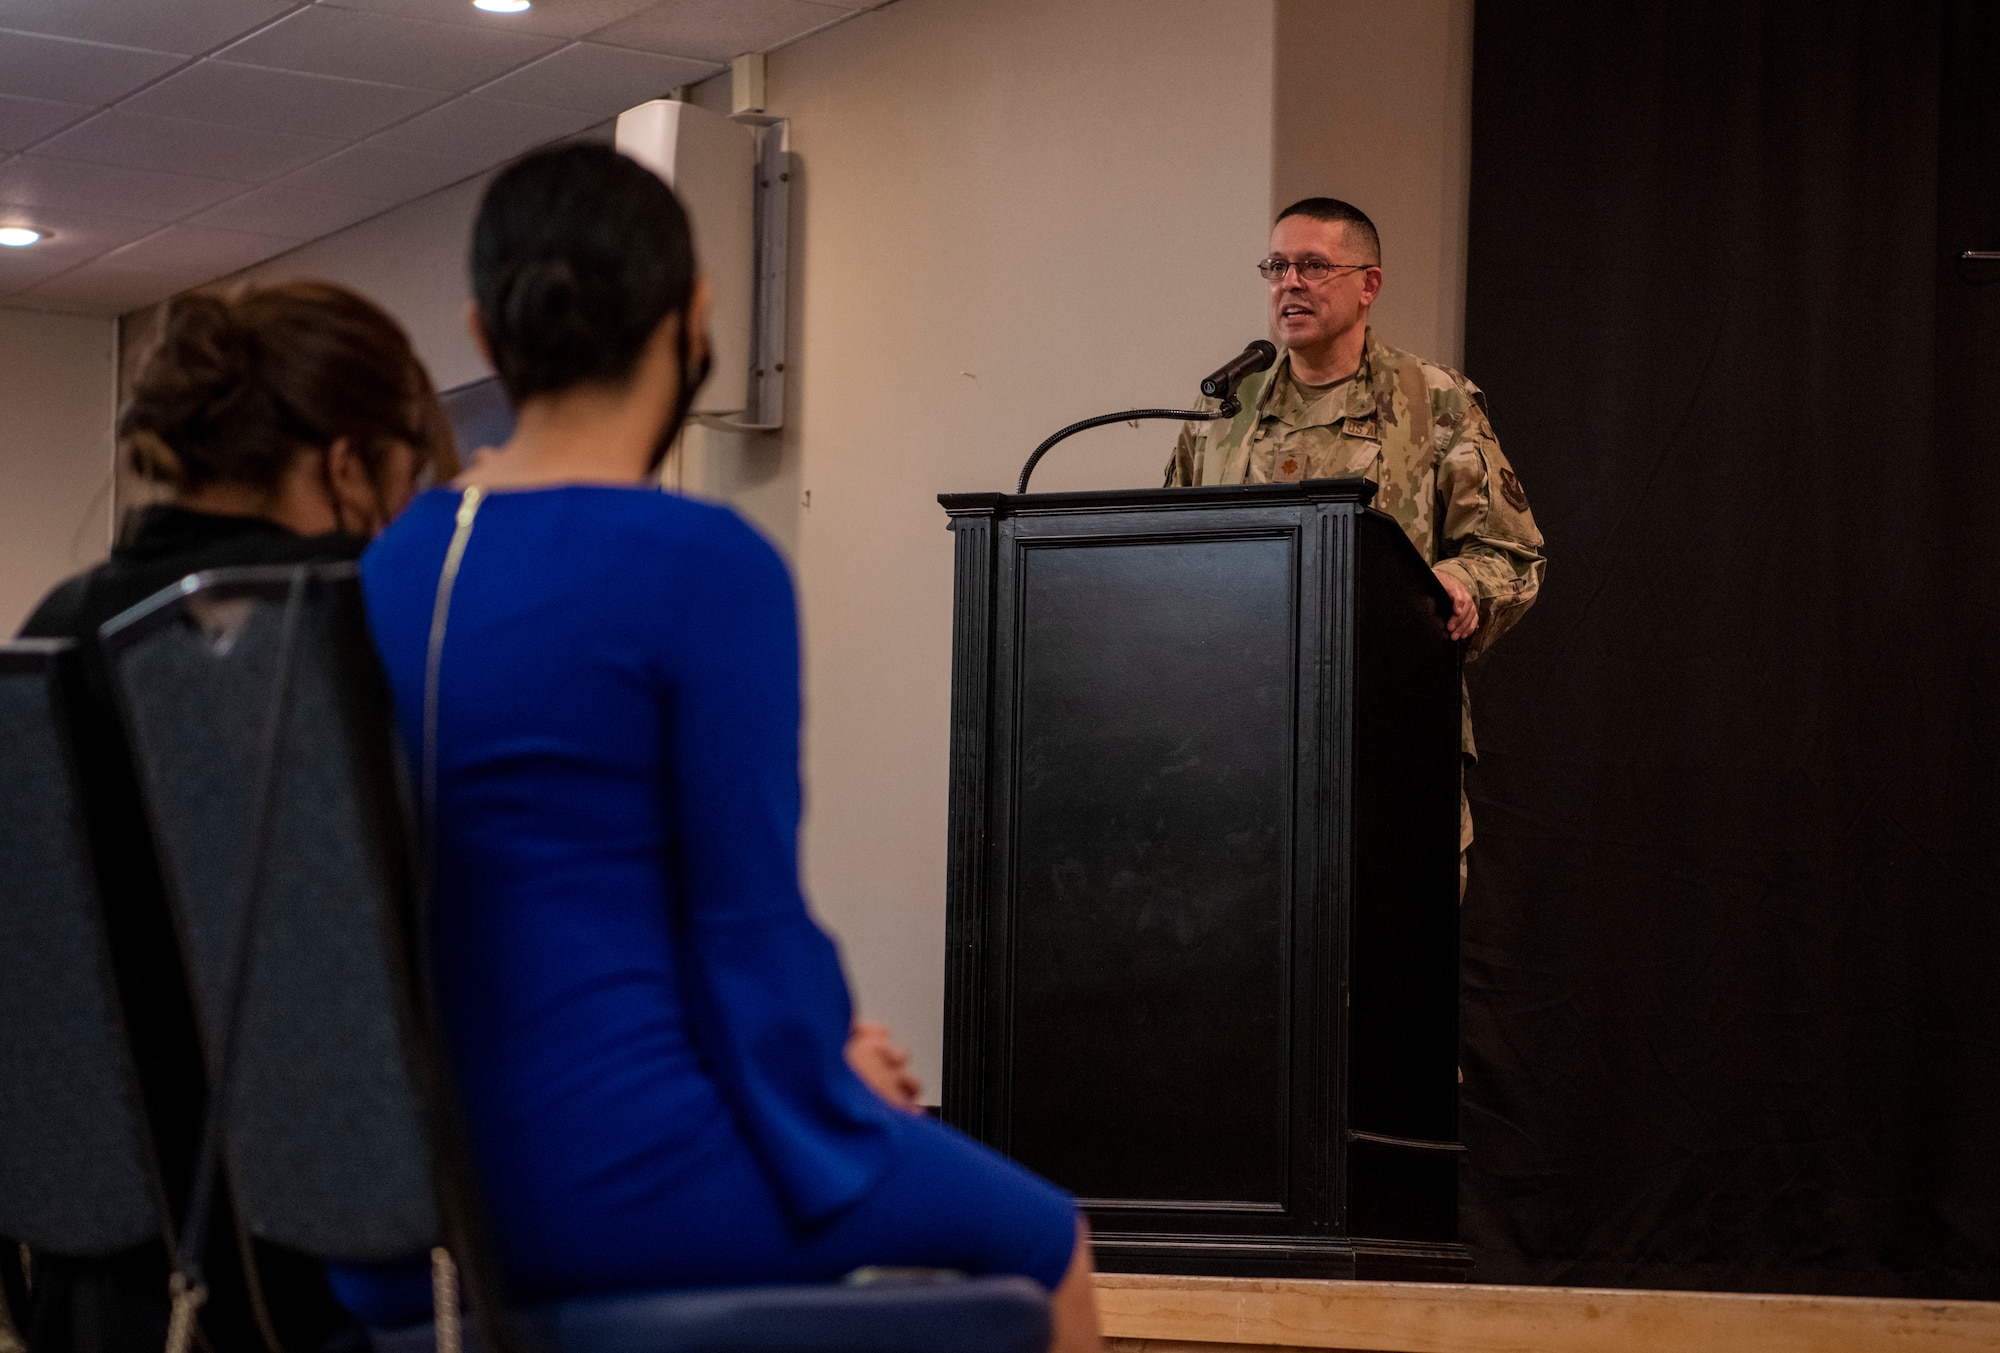 Chaplain (Maj.) Gabriel Rios, 7th Bomb Wing wing chaplain, speaks during his assumption of the stole ceremony at Dyess Air Force Base, Texas, Mar. 24, 2021.